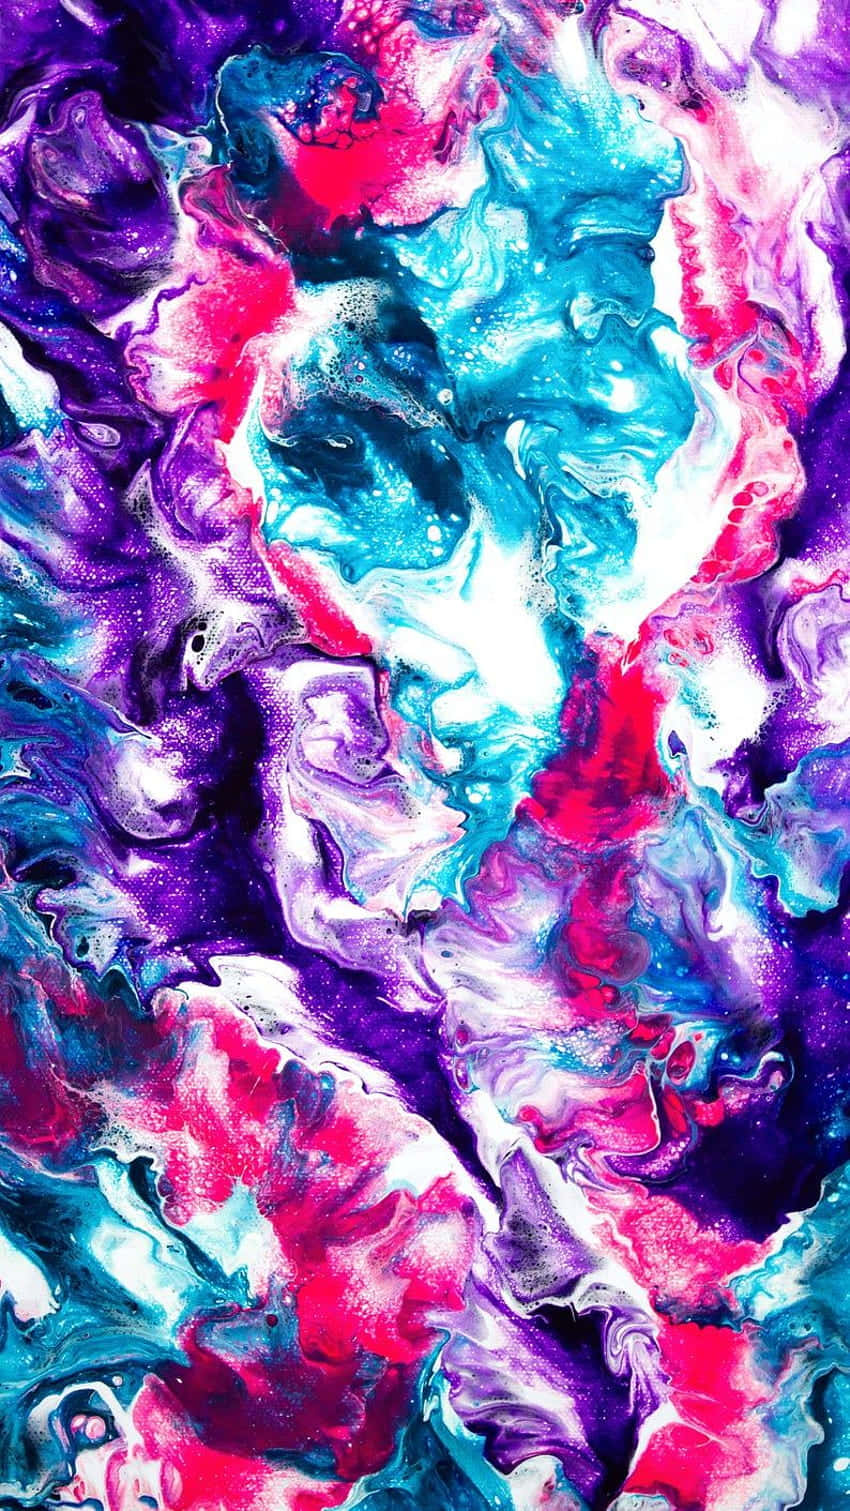 A Painting Of Purple, Blue And White Swirls